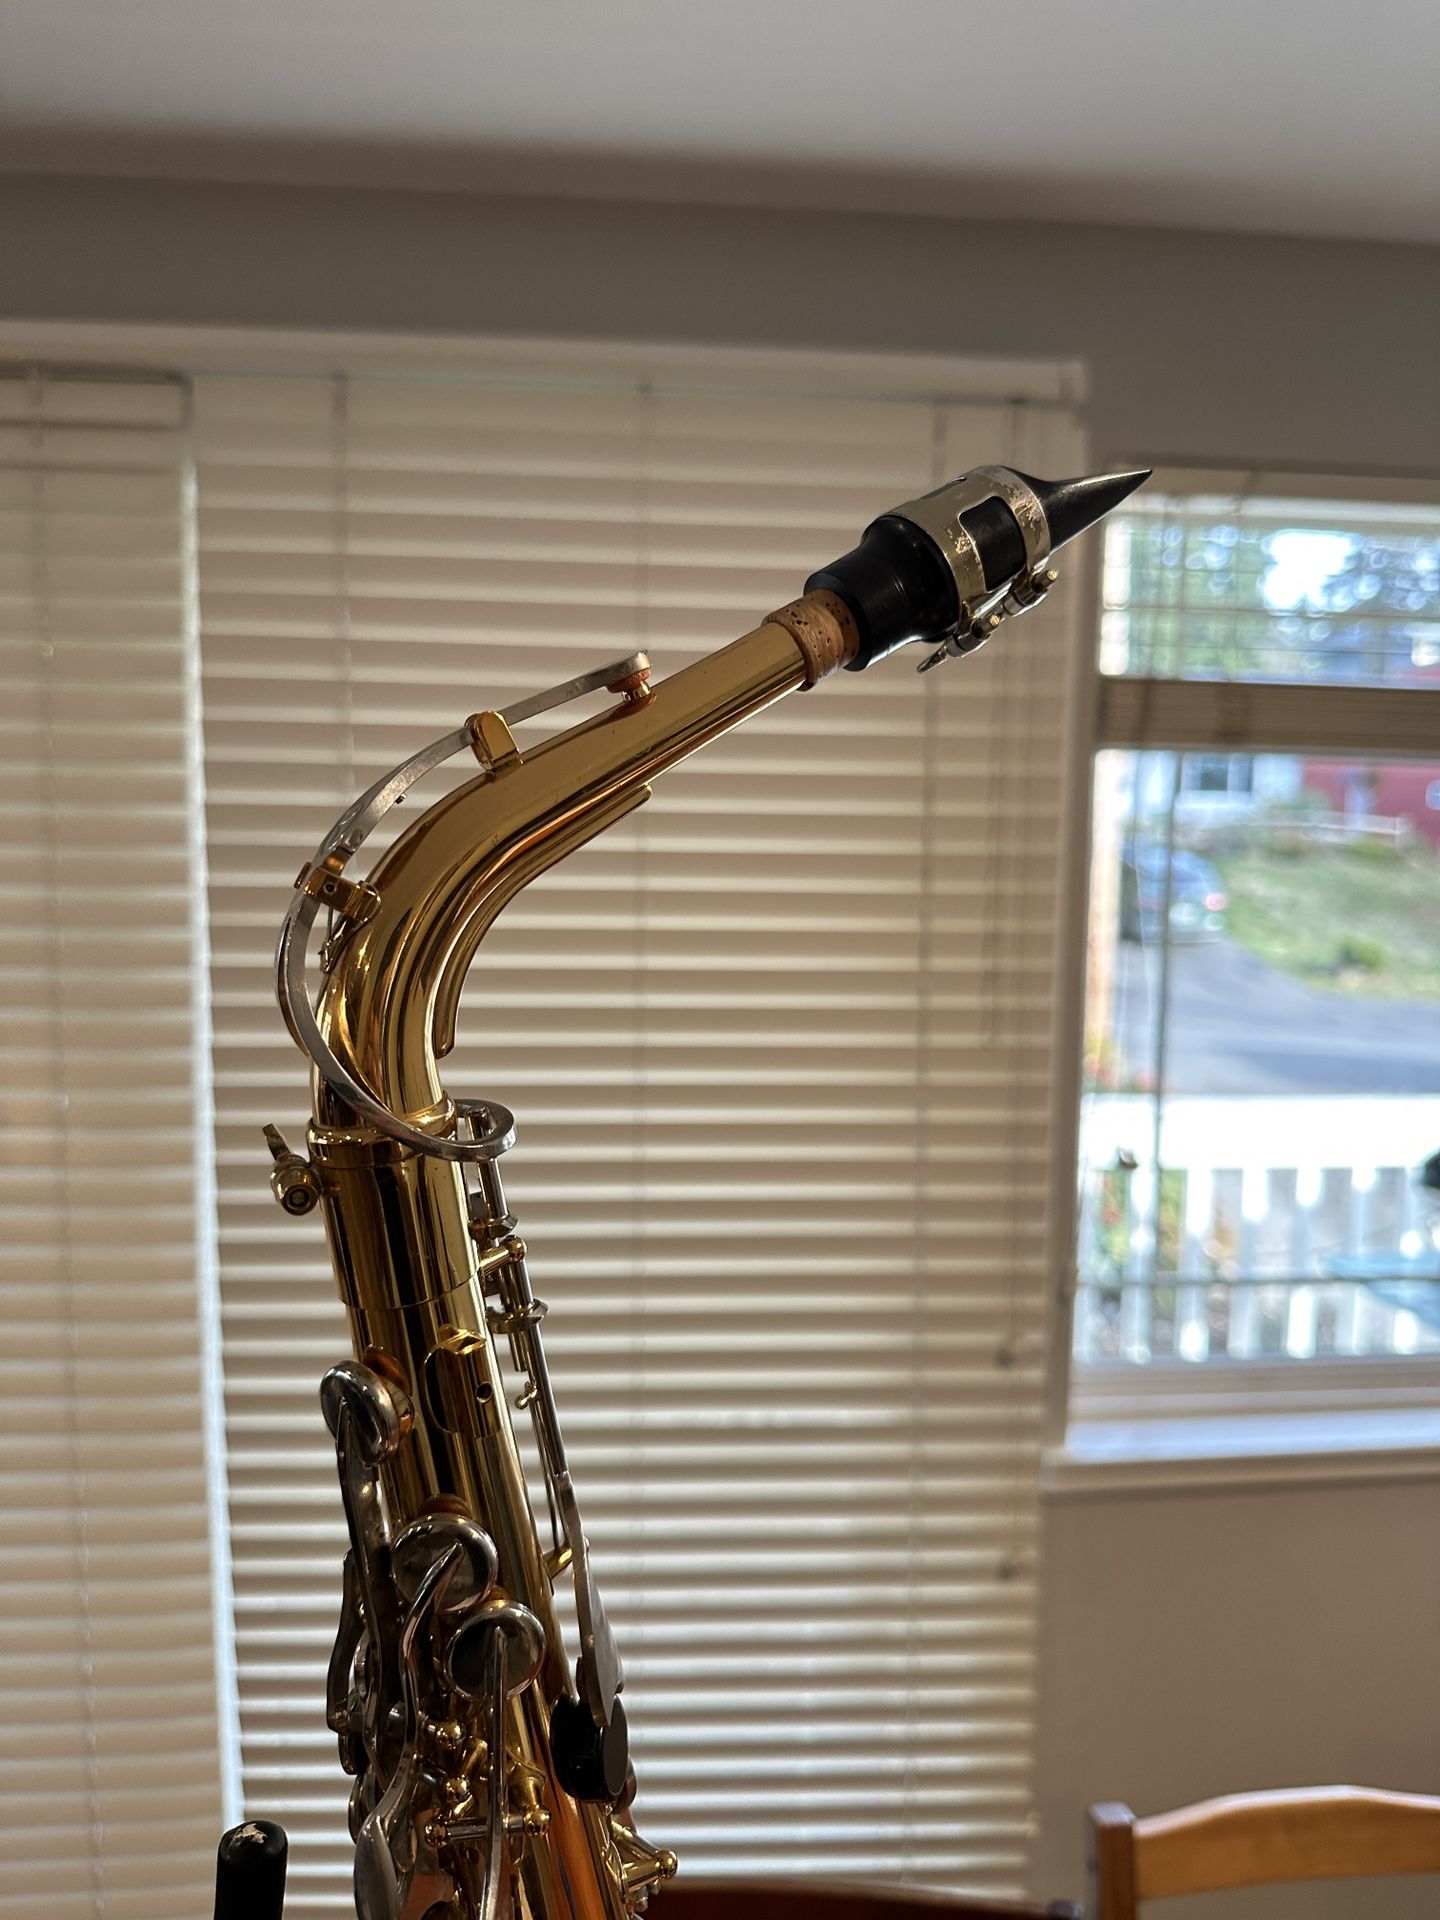 Alto Saxophone - Used, normal wear. $450 or best offer